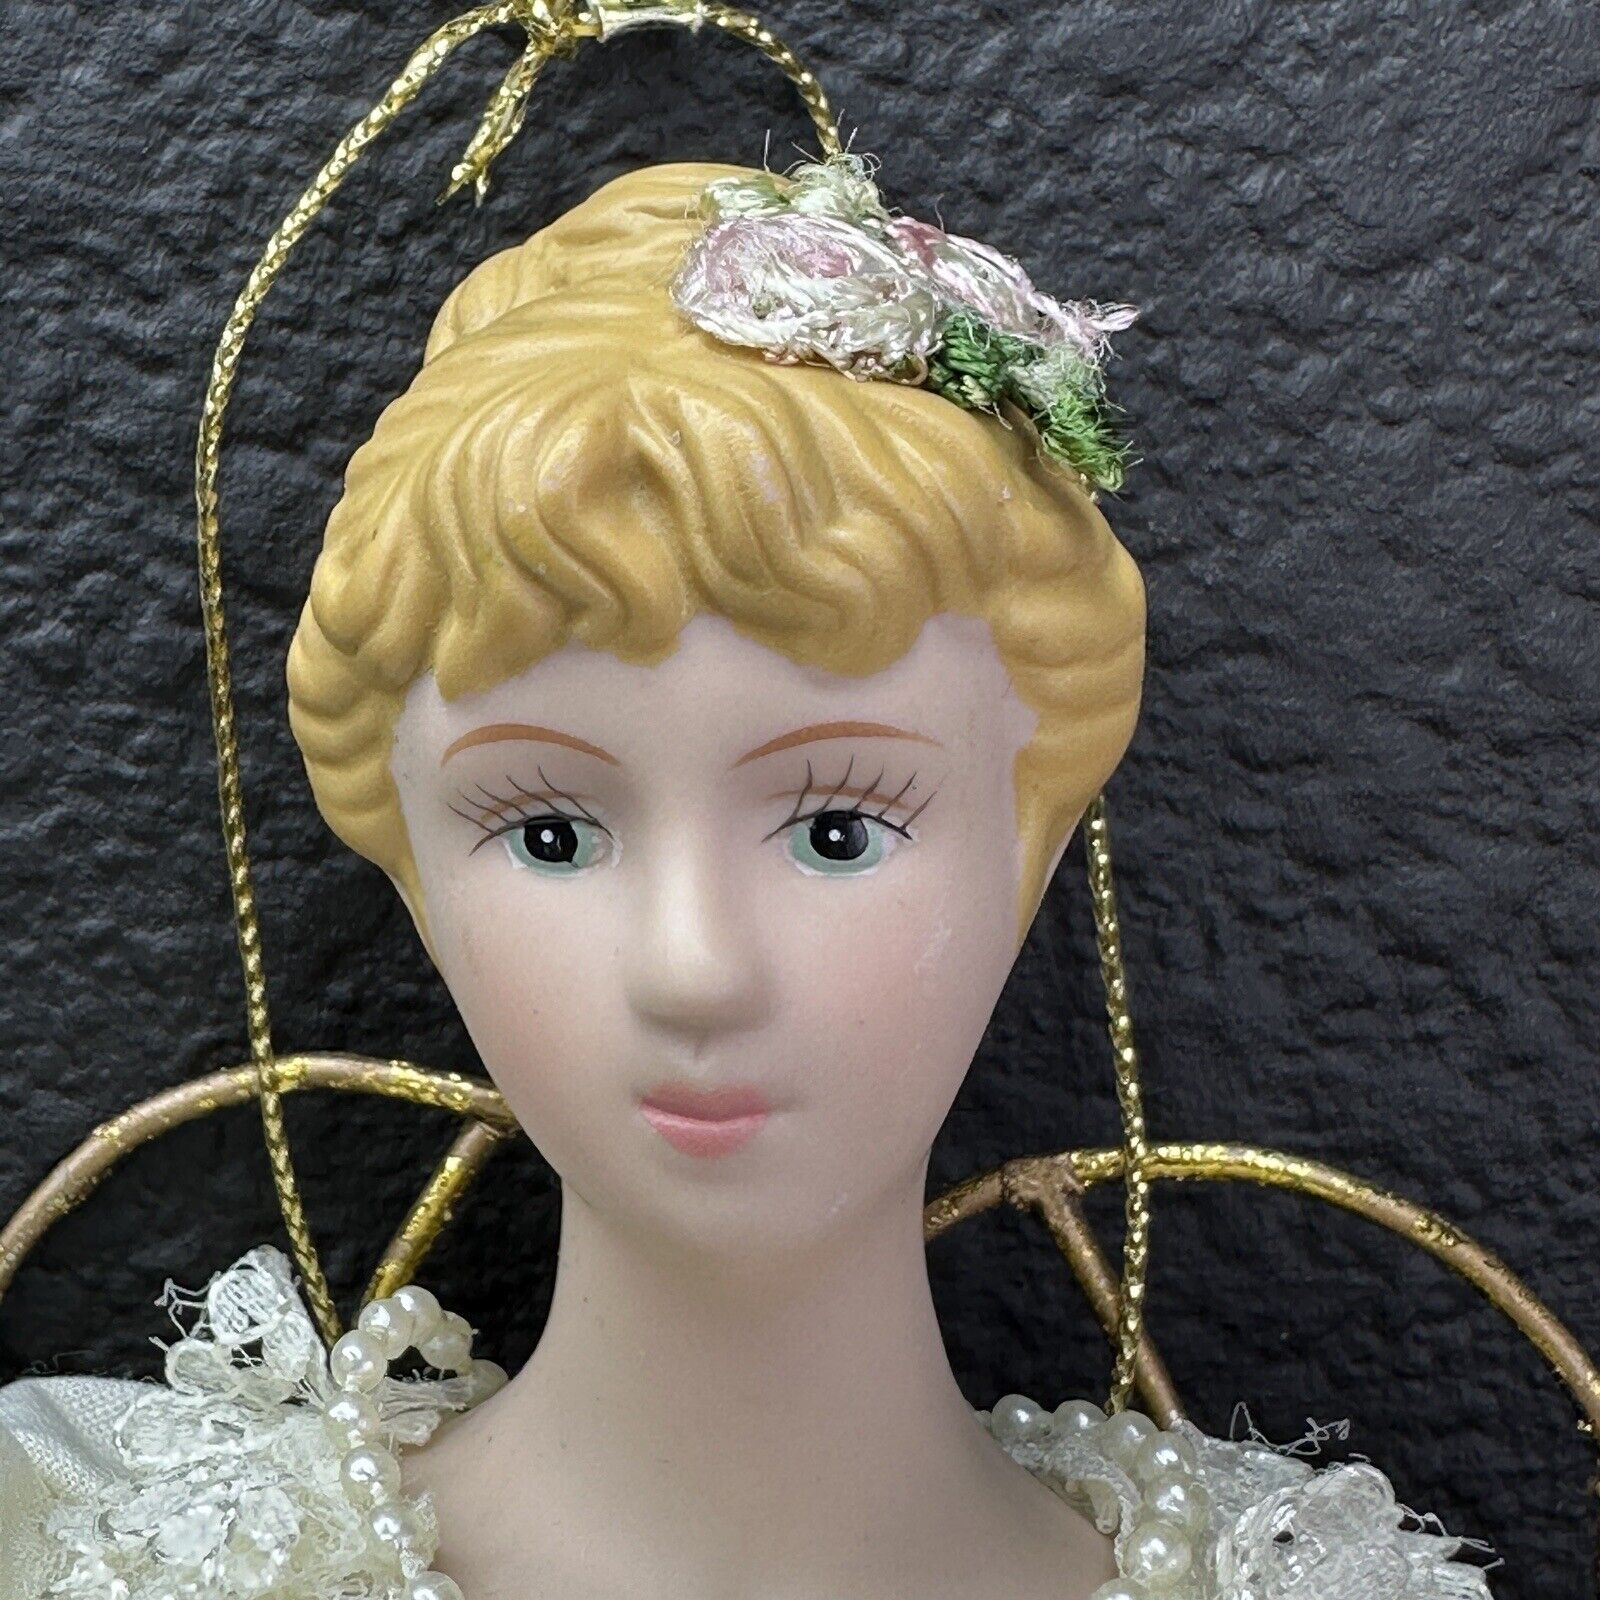 Vintage Large Angel Christmas Ornament Doll Hand Made, Hand Painted Porcelain 9”